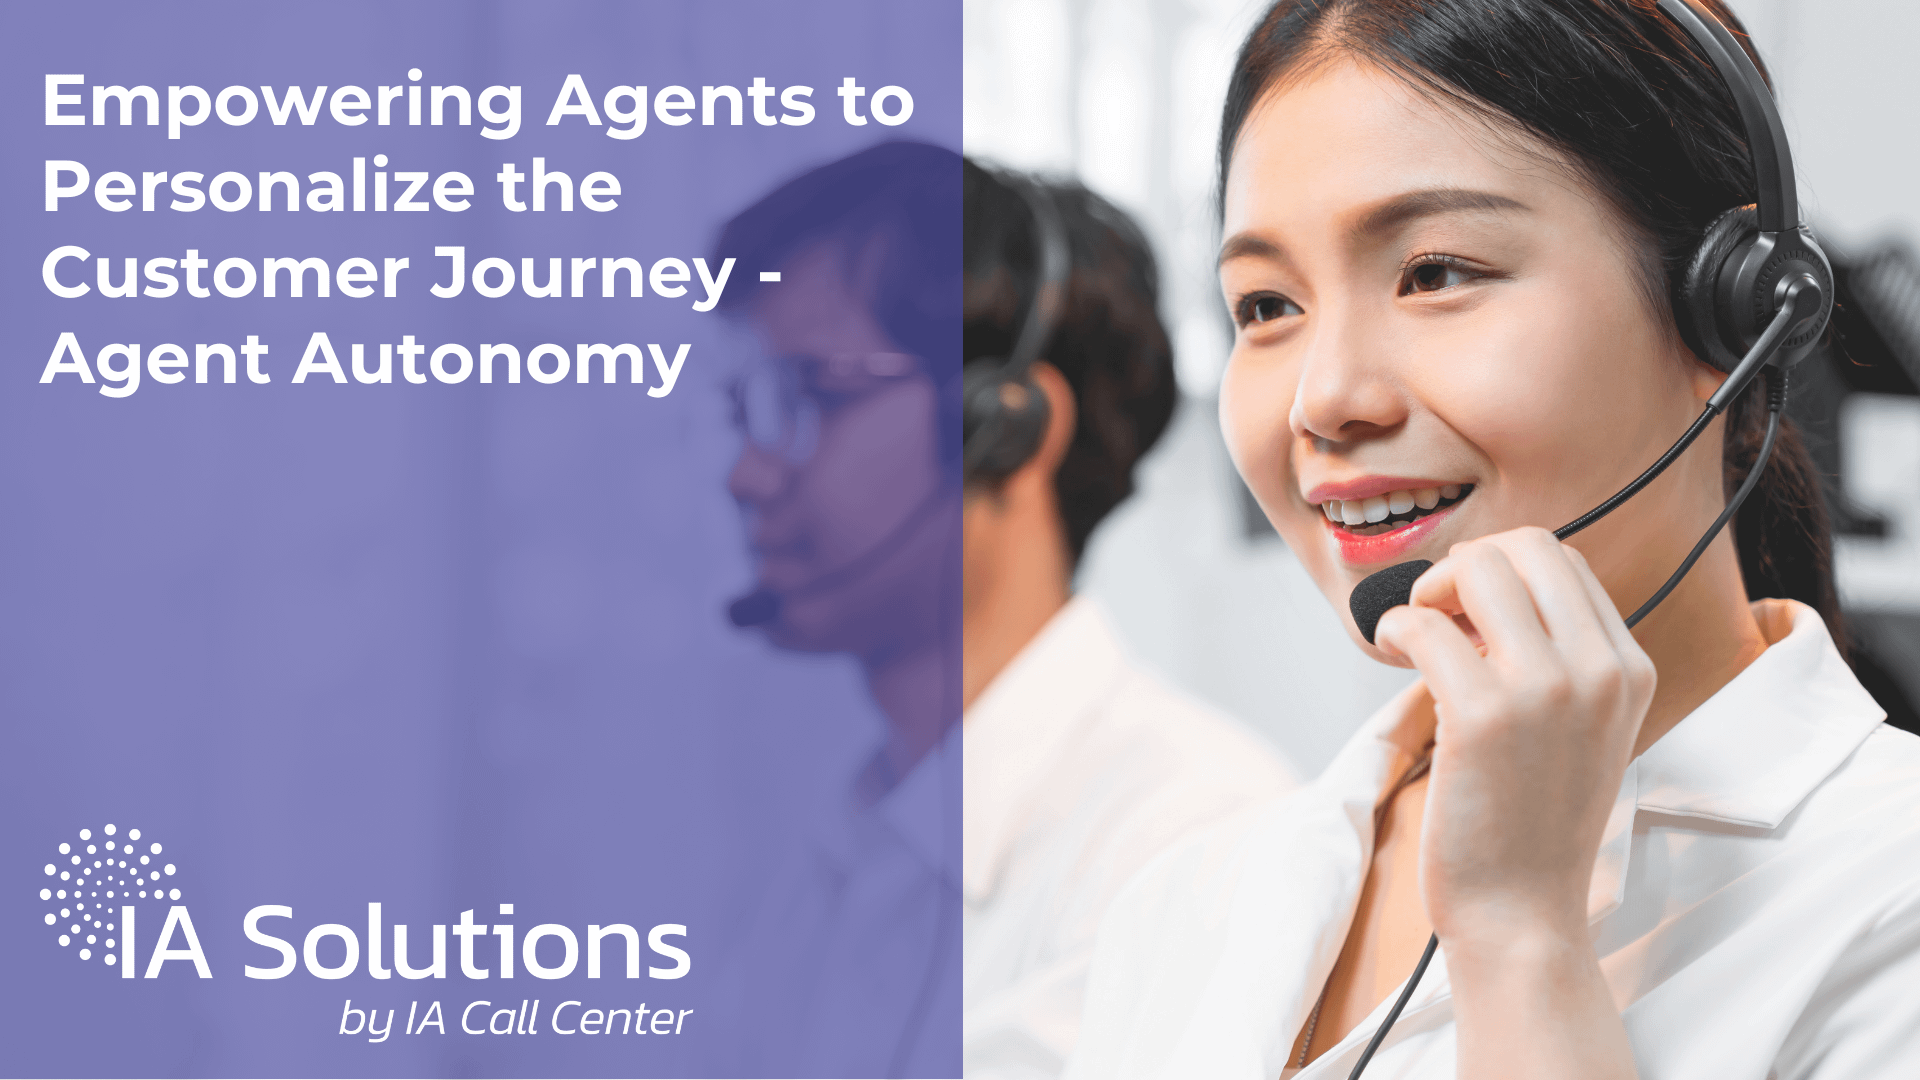 Empowering Agents to Personalize the Customer Journey - Agent Autonomy